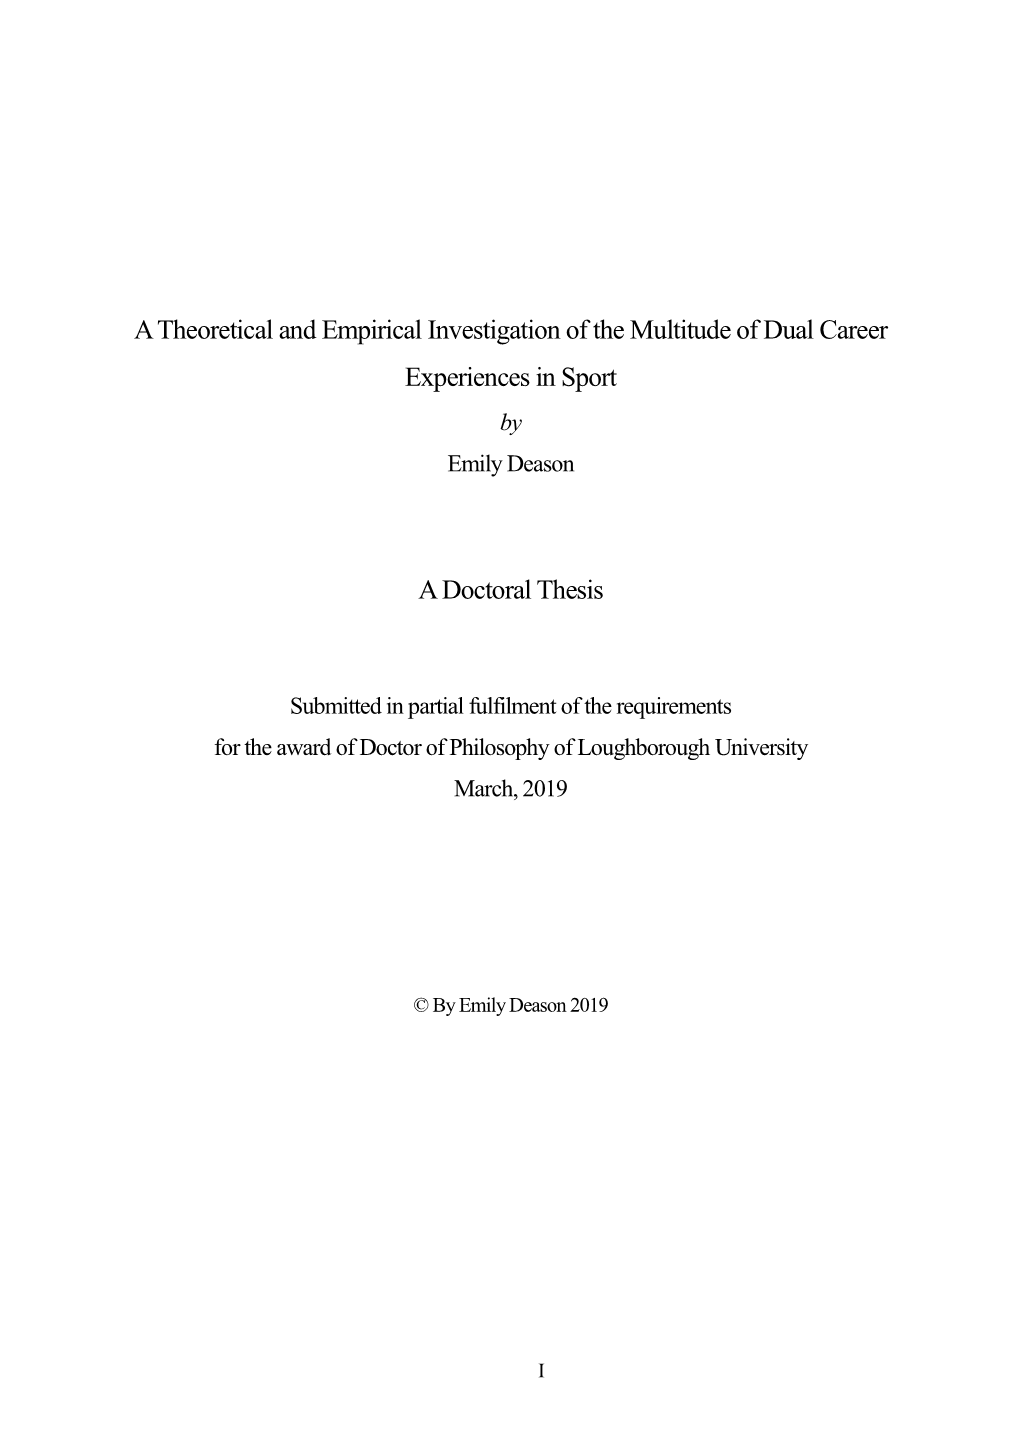 A Theoretical and Empirical Investigation of the Multitude of Dual Career Experiences in Sport a Doctoral Thesis